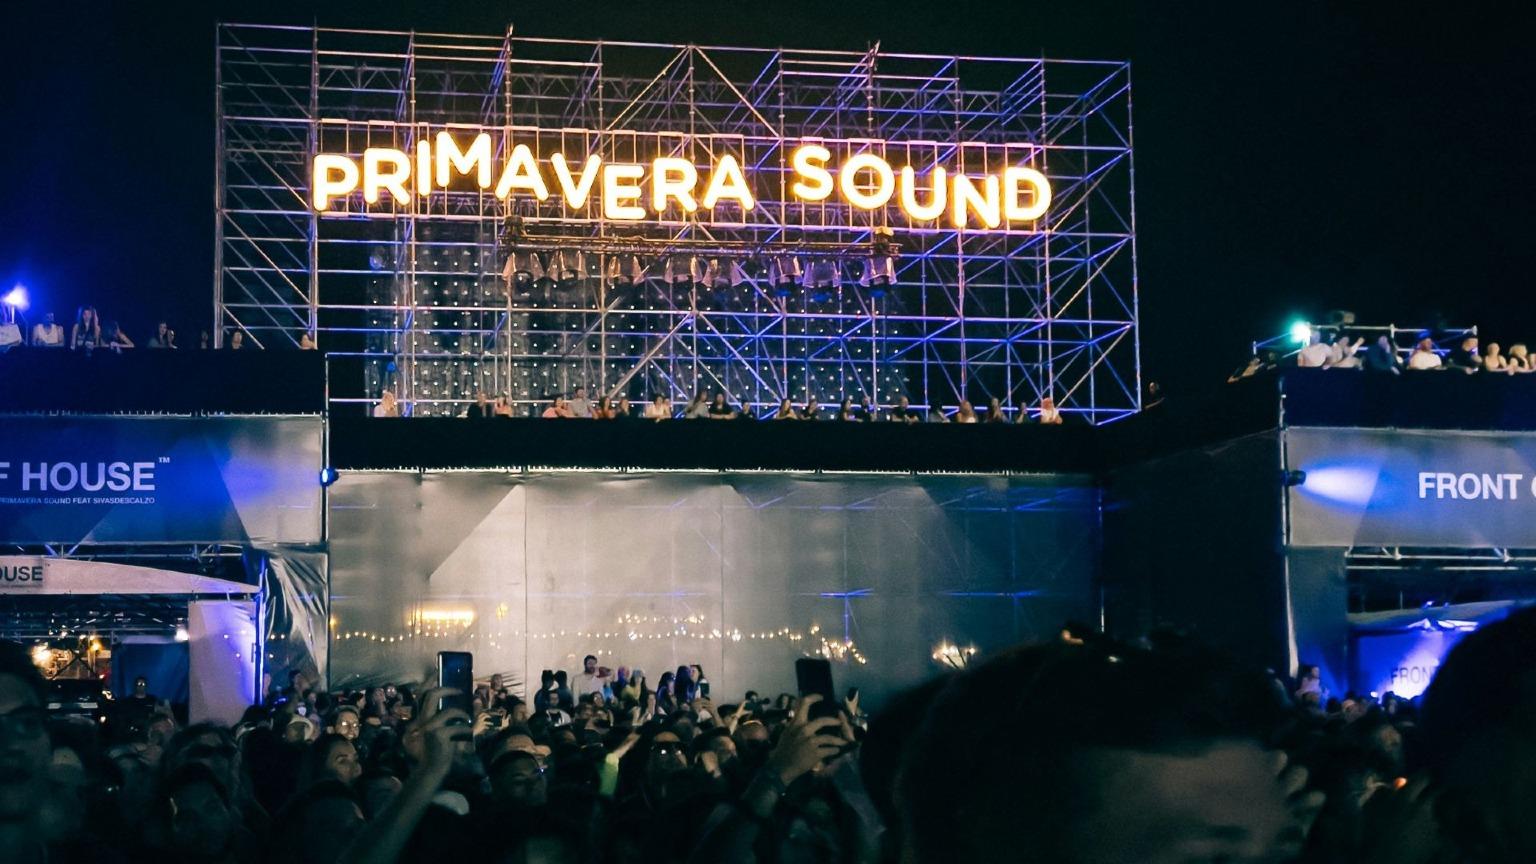 A vibrant scene of the Primavera Sound stage in Porto, illuminated with colorful lights as a large crowd of enthusiastic festival-goers enjoy the live performance at night.